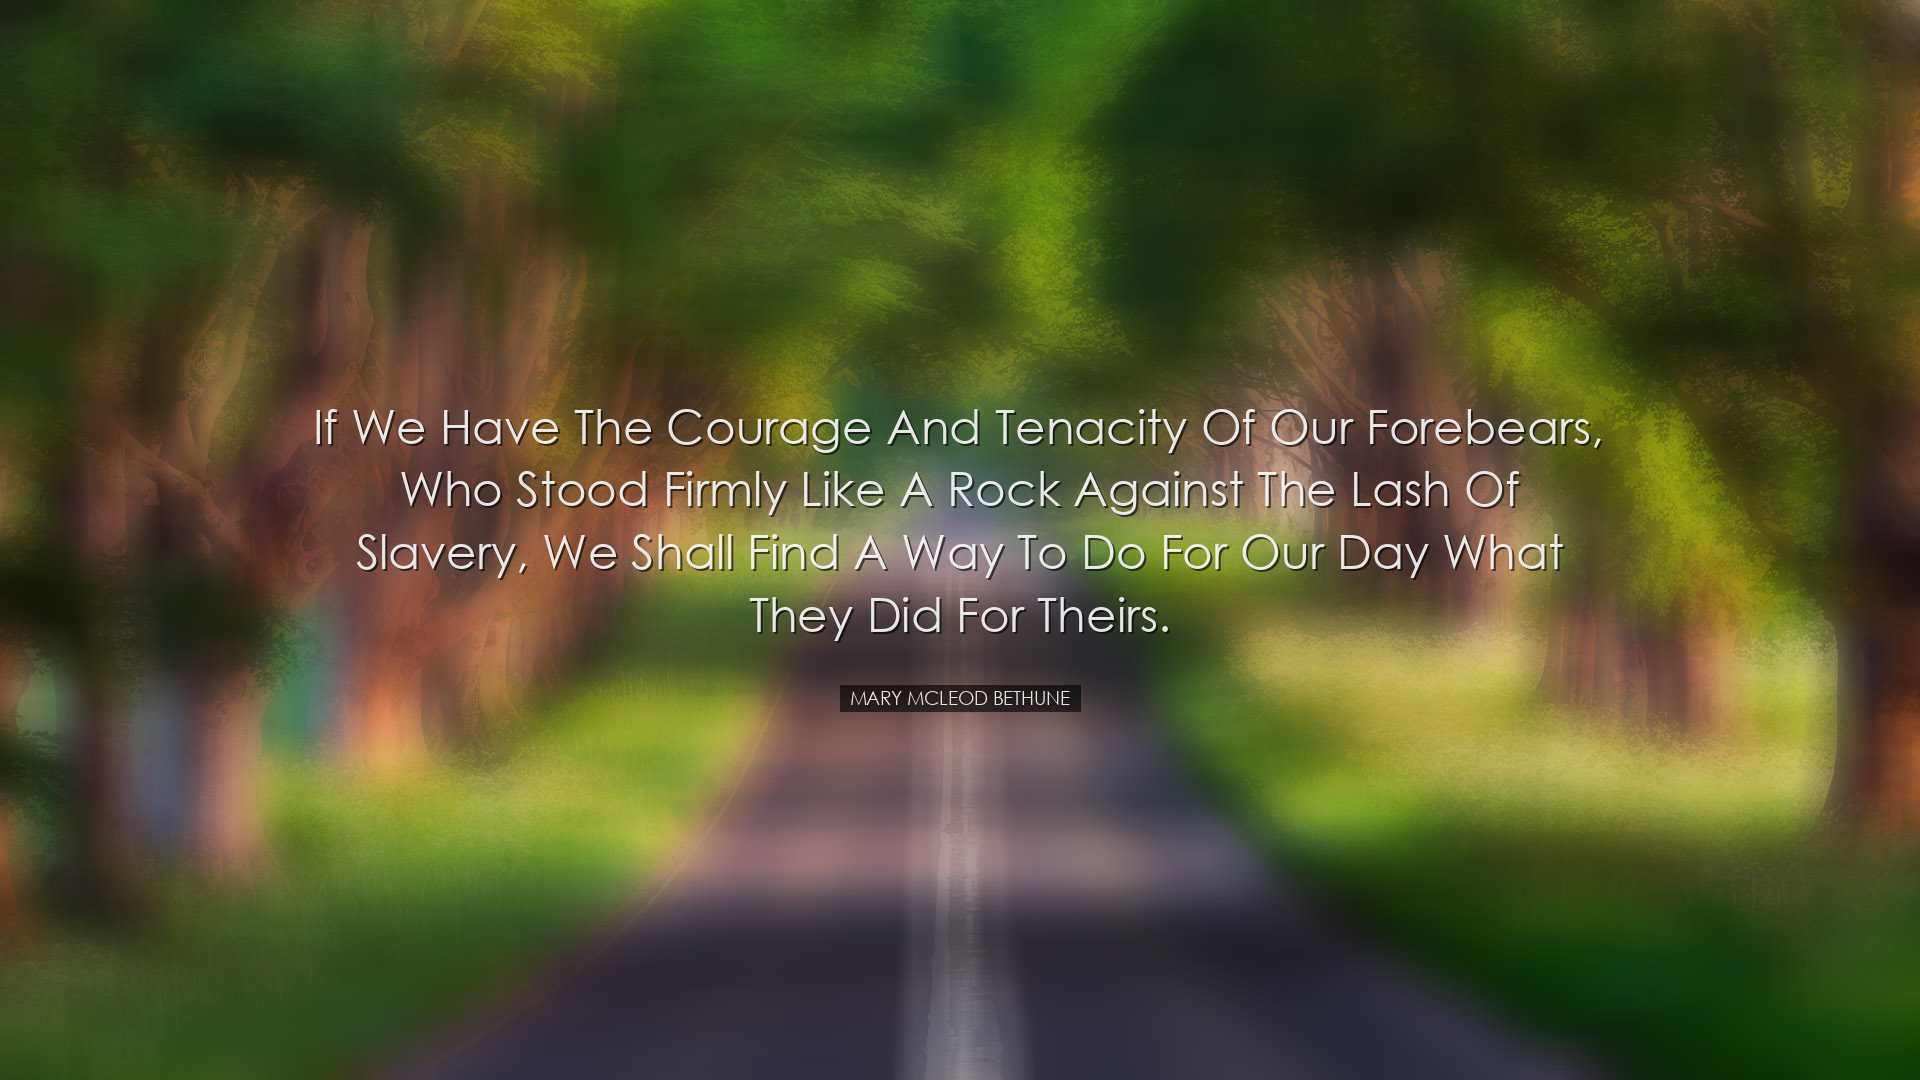 If we have the courage and tenacity of our forebears, who stood fi